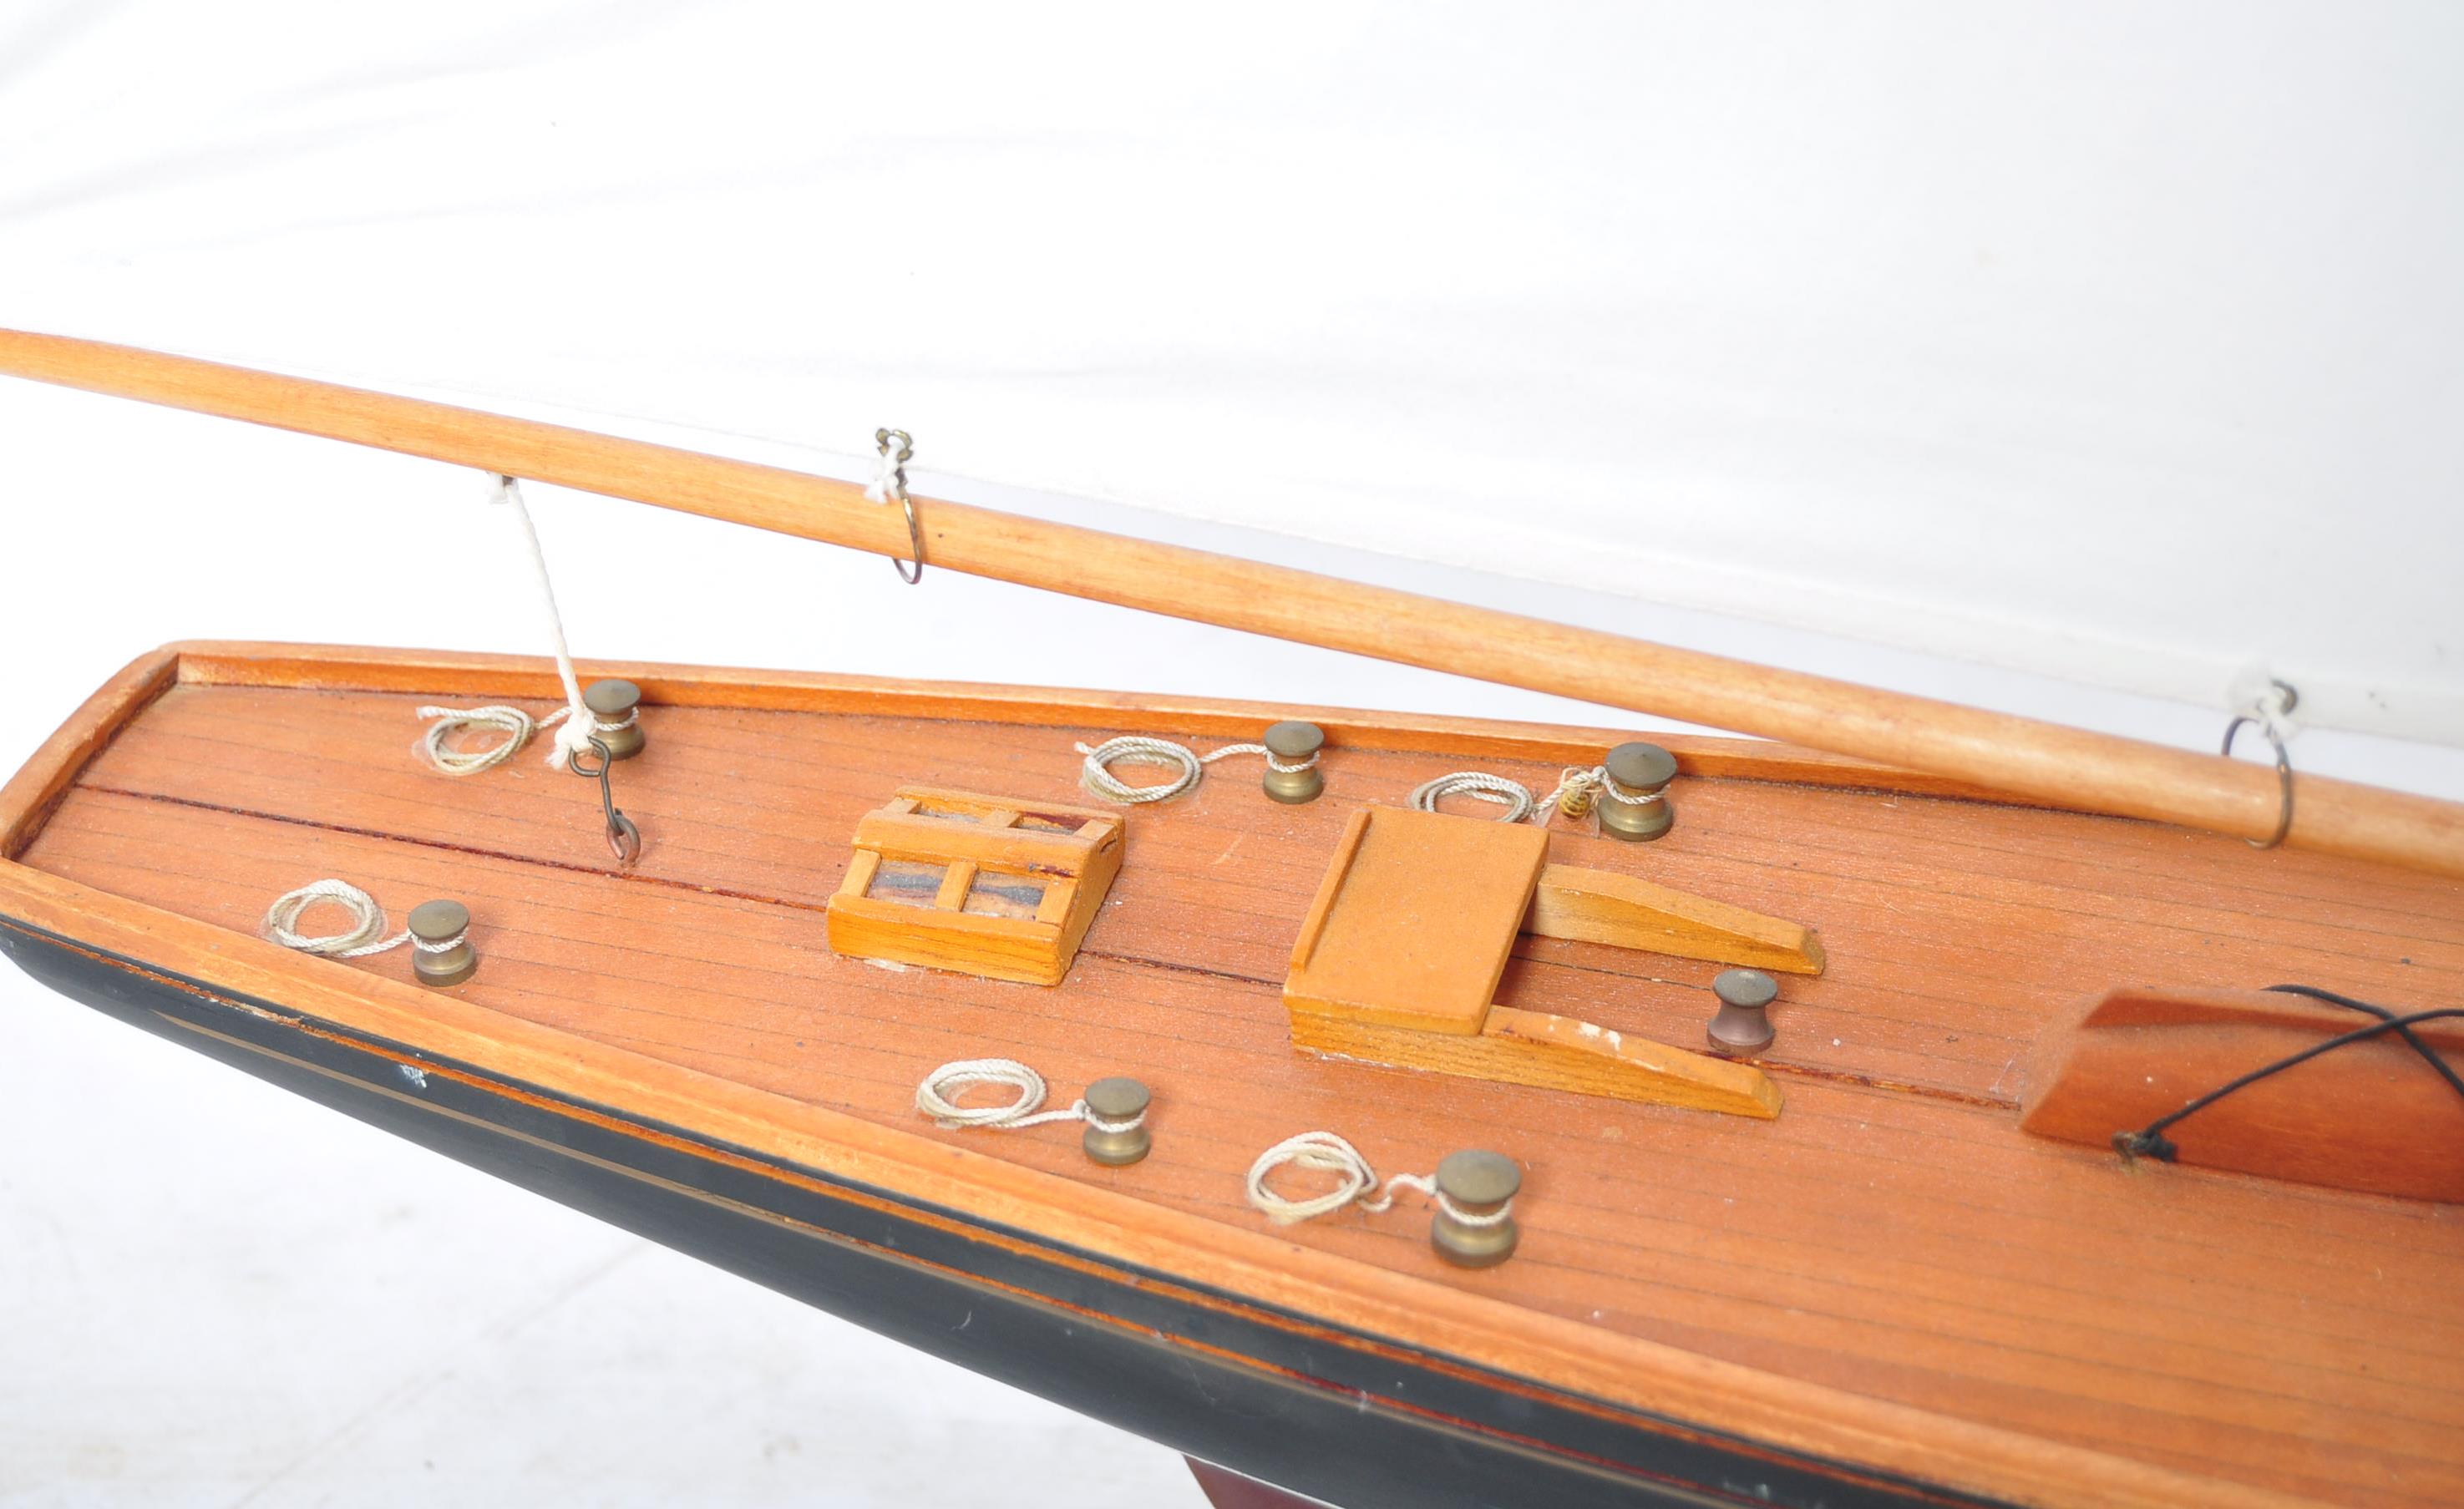 STUNNING MUSEUM QUALITY SCRATCH BUILT MODEL BOAT - Image 4 of 6